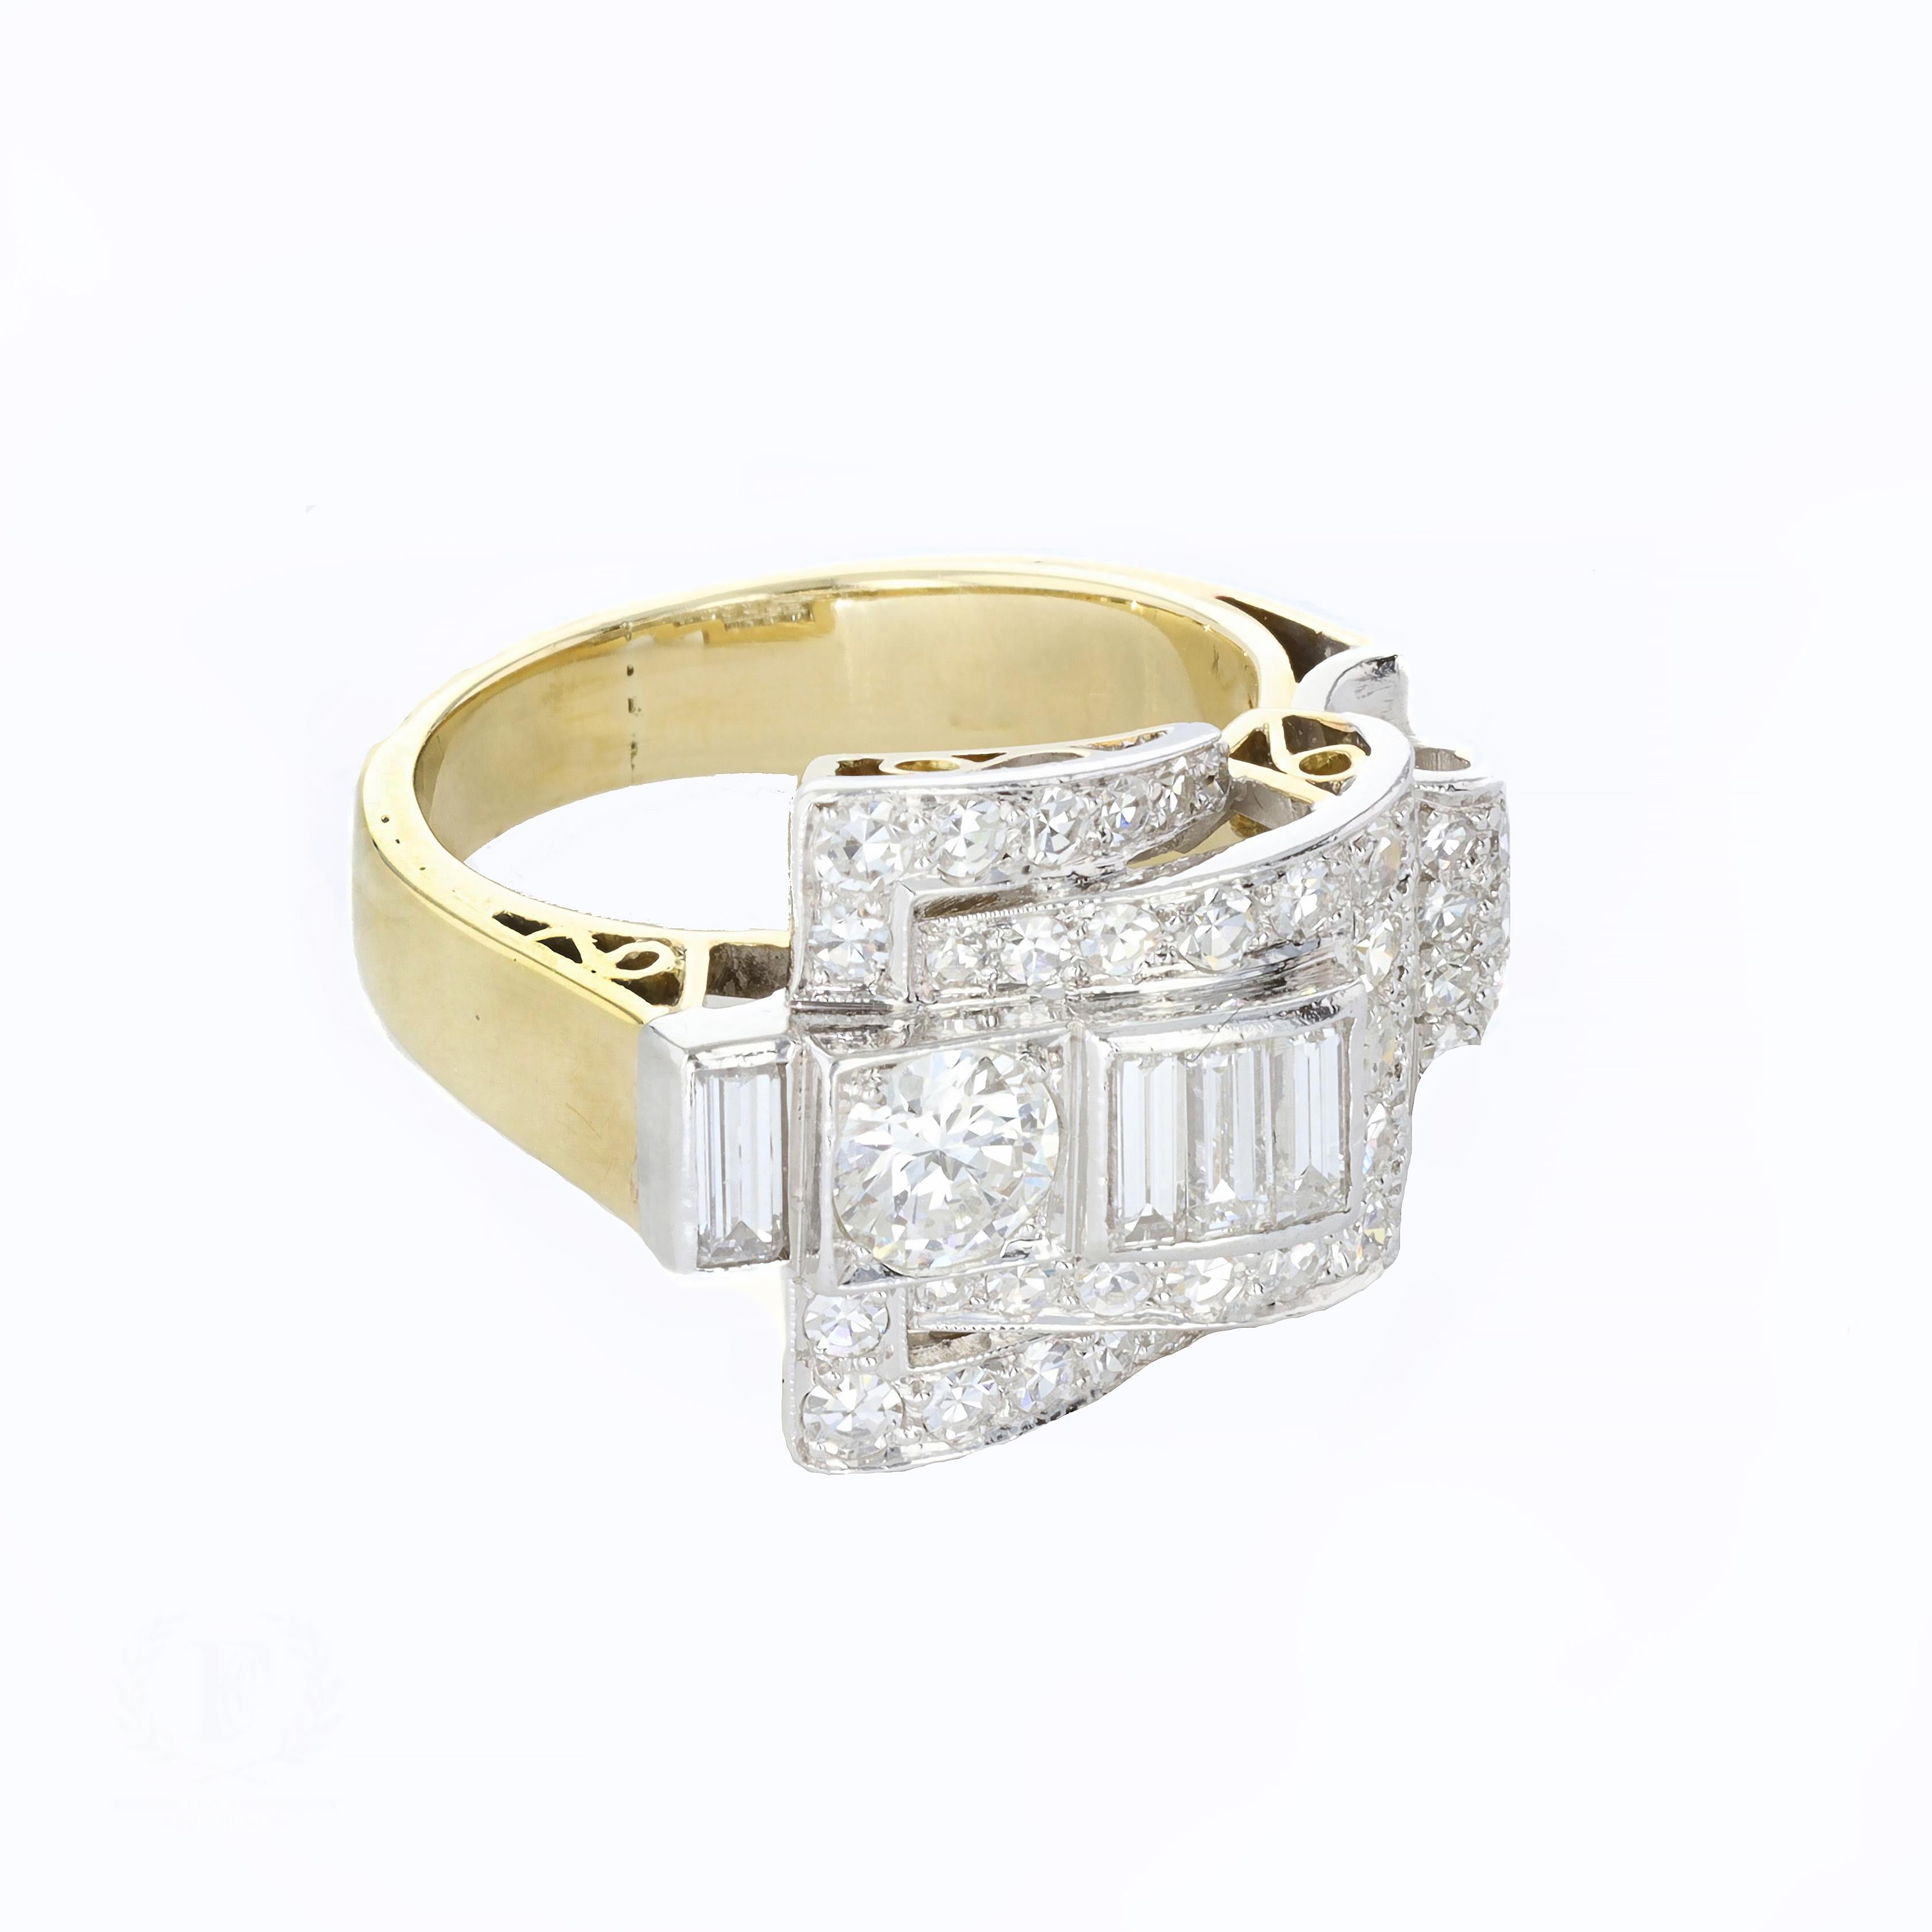 Retro 1.40ct Diamond 18k Yellow Gold and Platinum Ring. The ring is set with round and baguette cut diamonds that weigh approximately 1.40ct. The color of the diamonds is F-G with VS1 clarity. The ring weighs 9.2 grams.